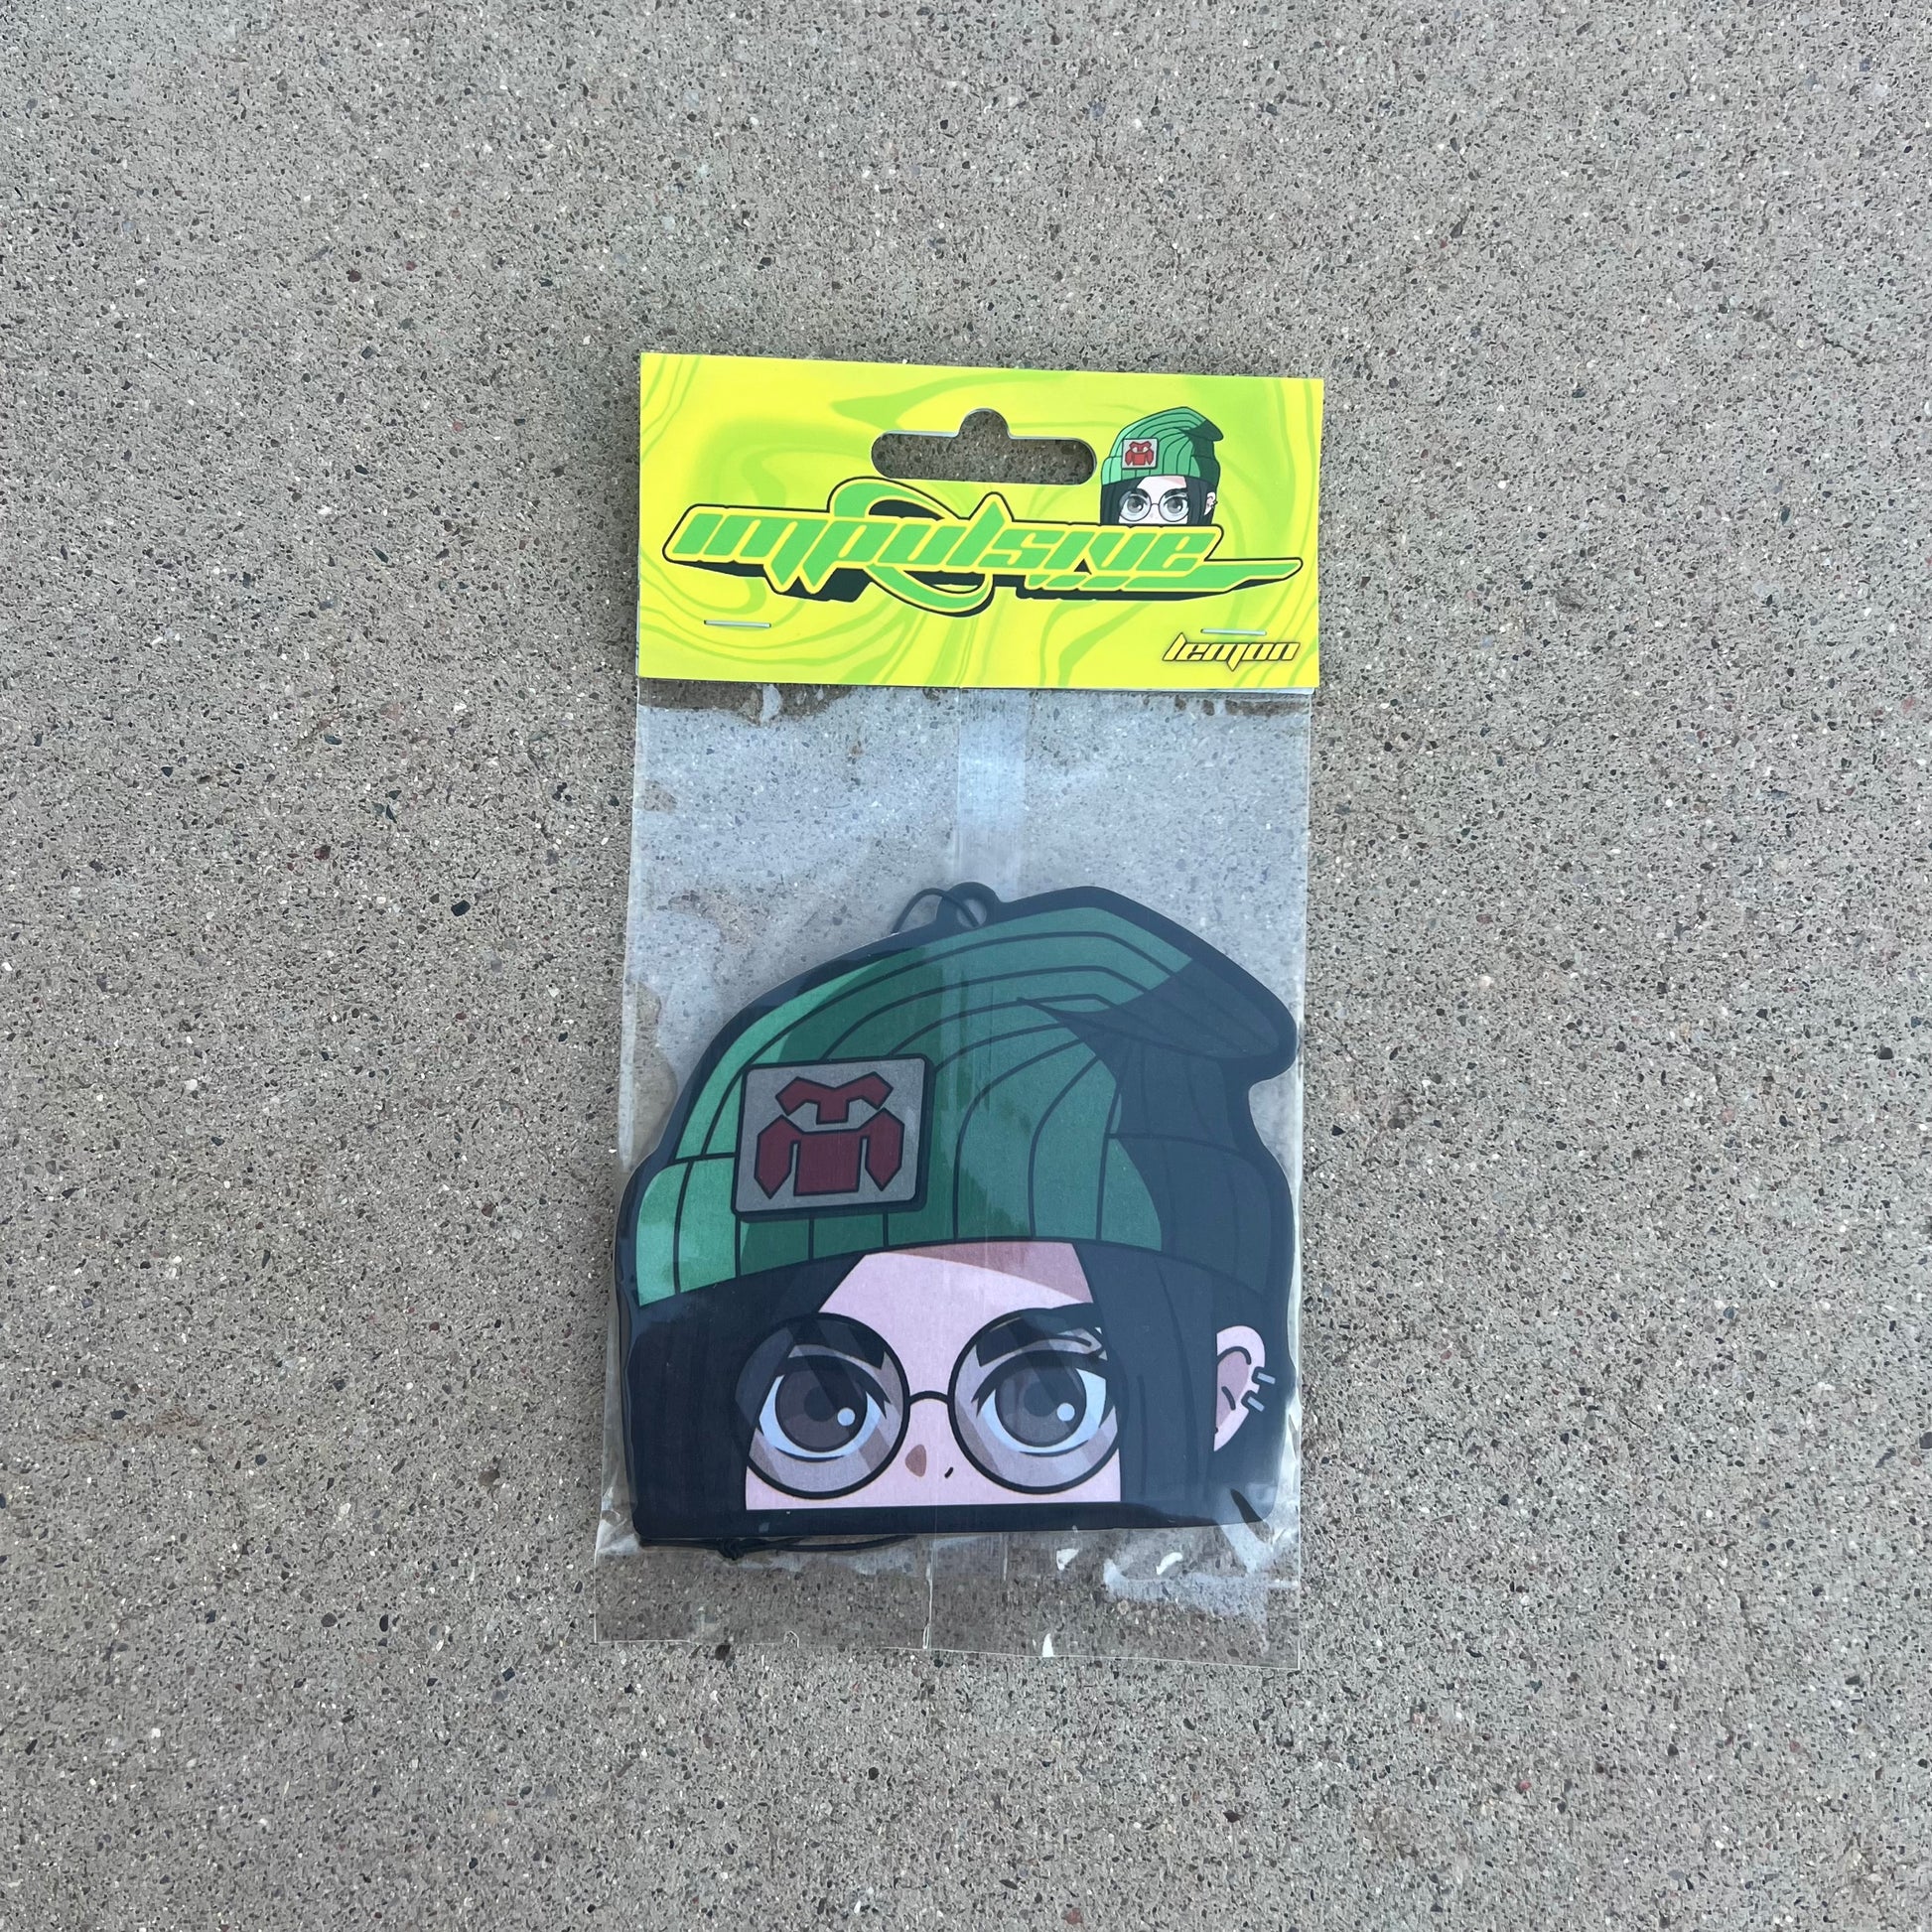 Anime Character Killjoy Lemon Scent Air freshener. Anime character, green beanie with logo, brown eyes with glasses, black hair with cuff earrings on left ear, hanging from black string. Yellow and green swirl cardboard head card packaging. Retro Y2K impulsive logo lemon label.